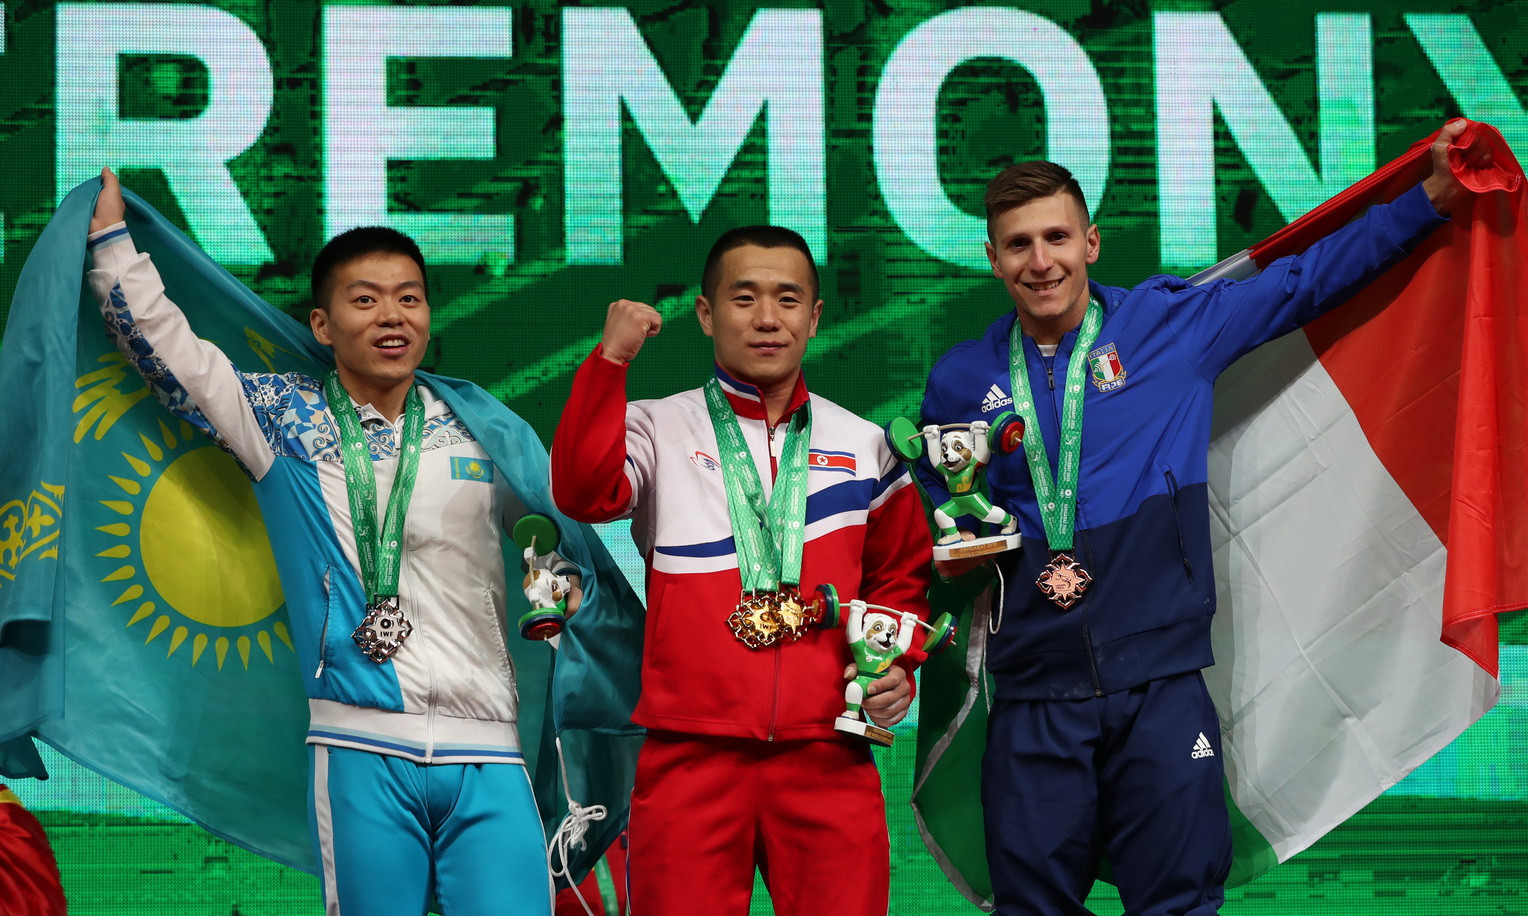 North Korea's Om Yun Chol broke the men’s 55 kilograms clean and jerk world standard en route to claiming a hat-trick of gold medals on day two of the 2018 International Weightlifting Federation World Championships in Turkmenistan's capital Ashgabat ©IWF